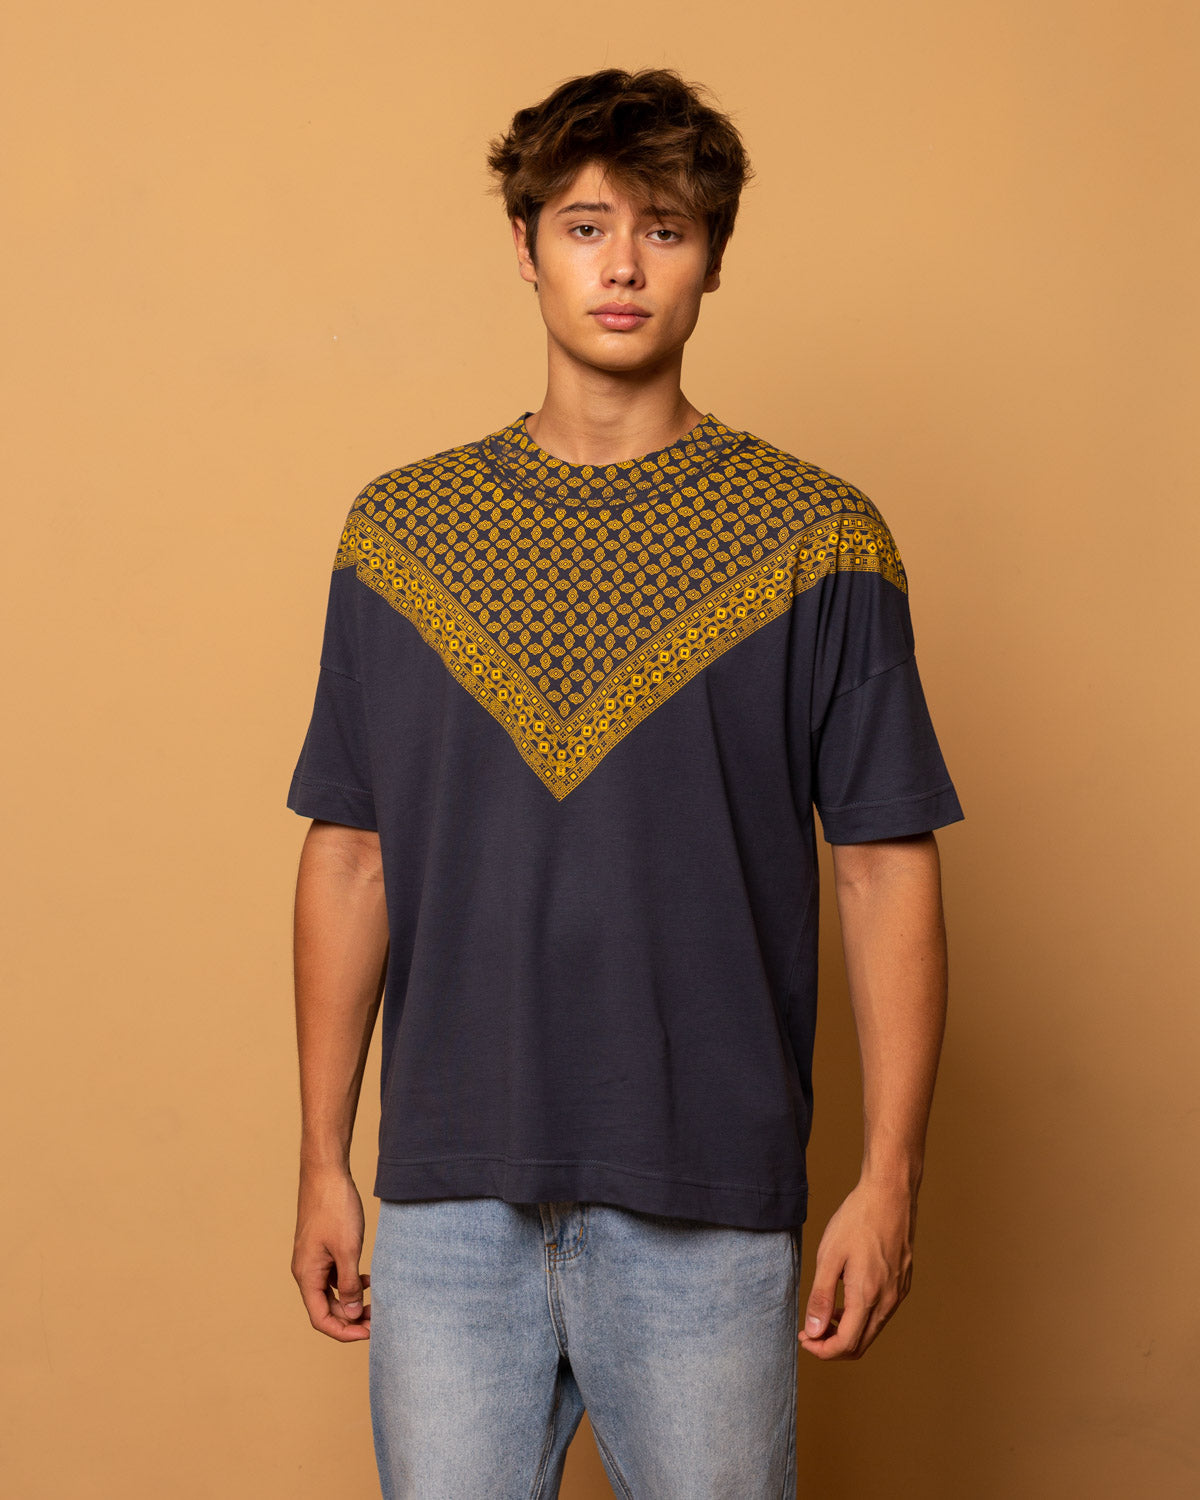 Gray unisex Oversize T-Shirt printed by hand in Yellow - 003